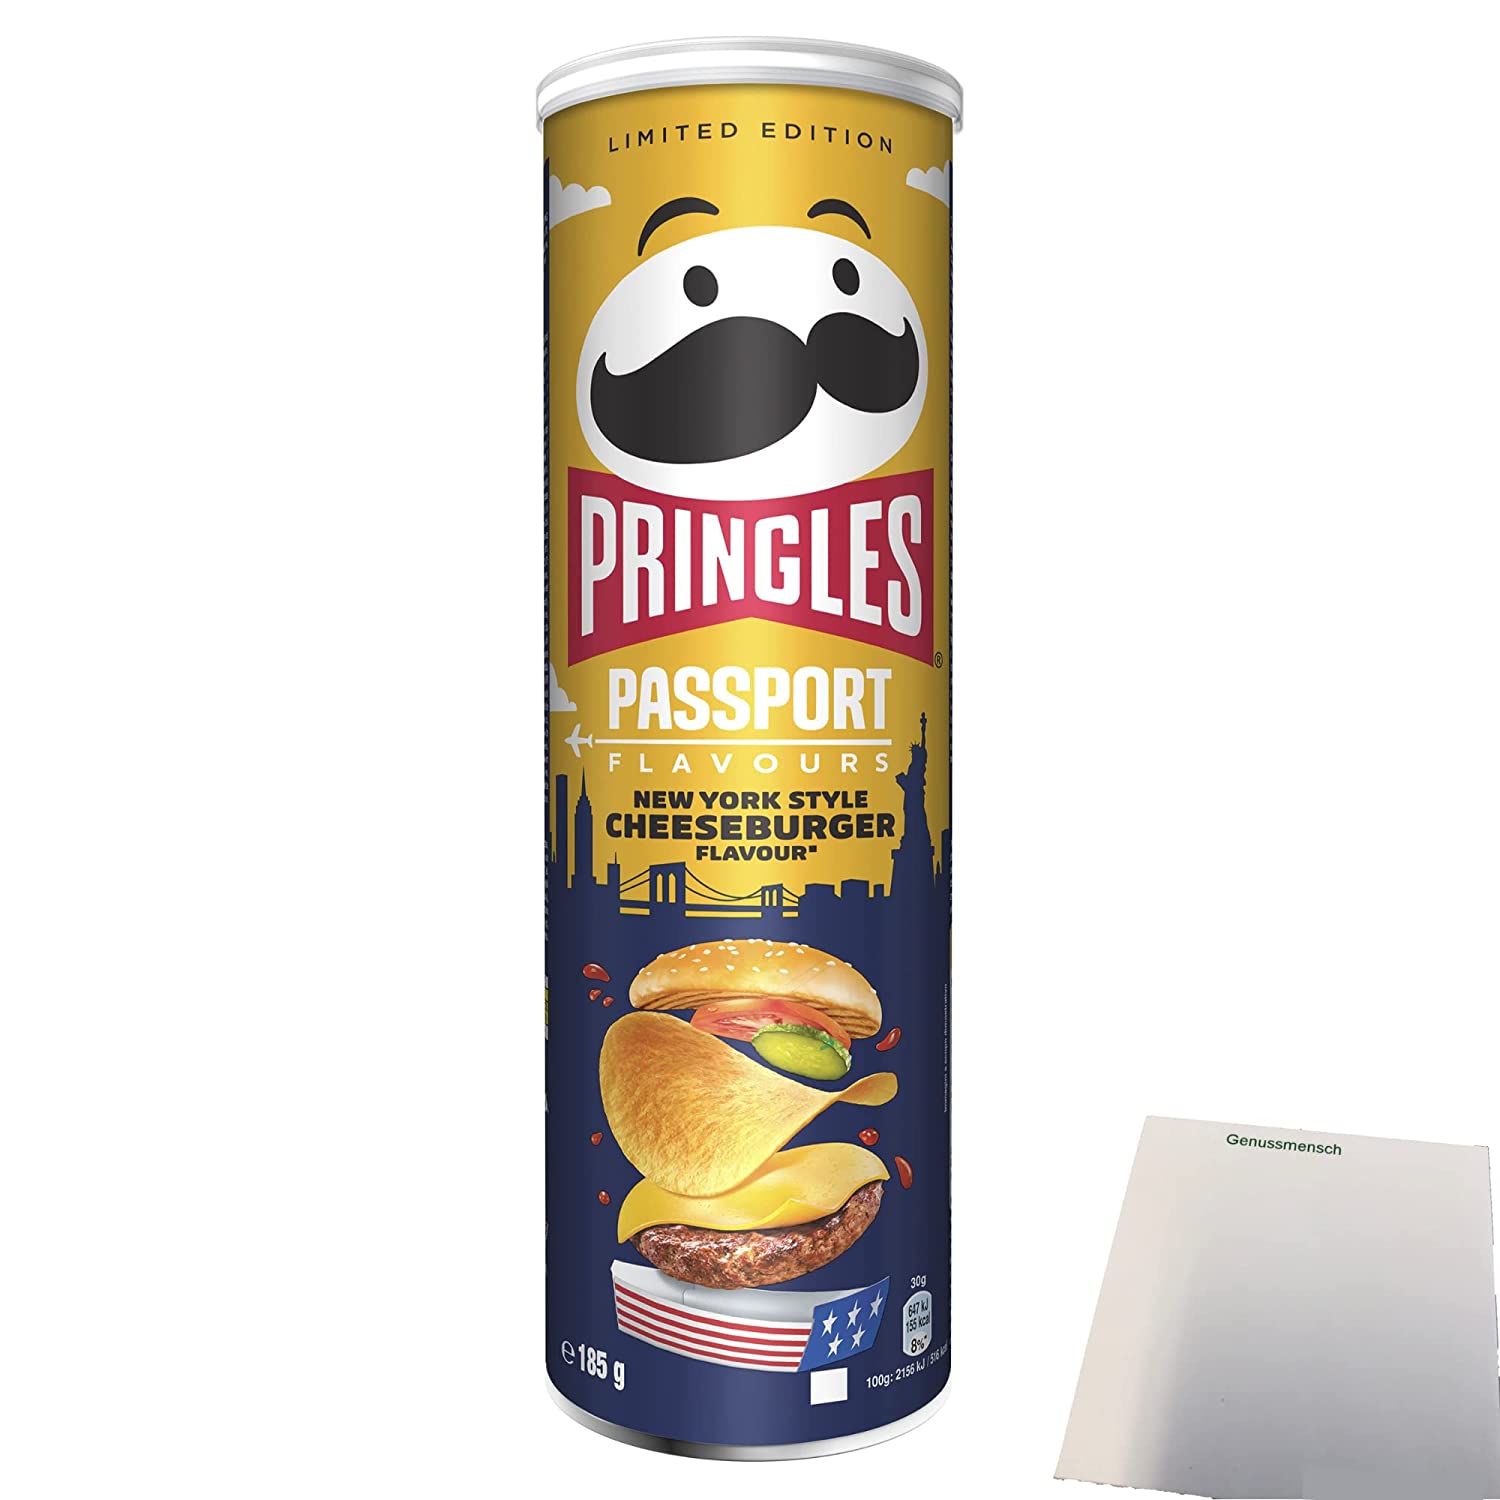 Pringles Passport Flavours New York Style Cheeseburger Flavour (185g Packung) + usy Block